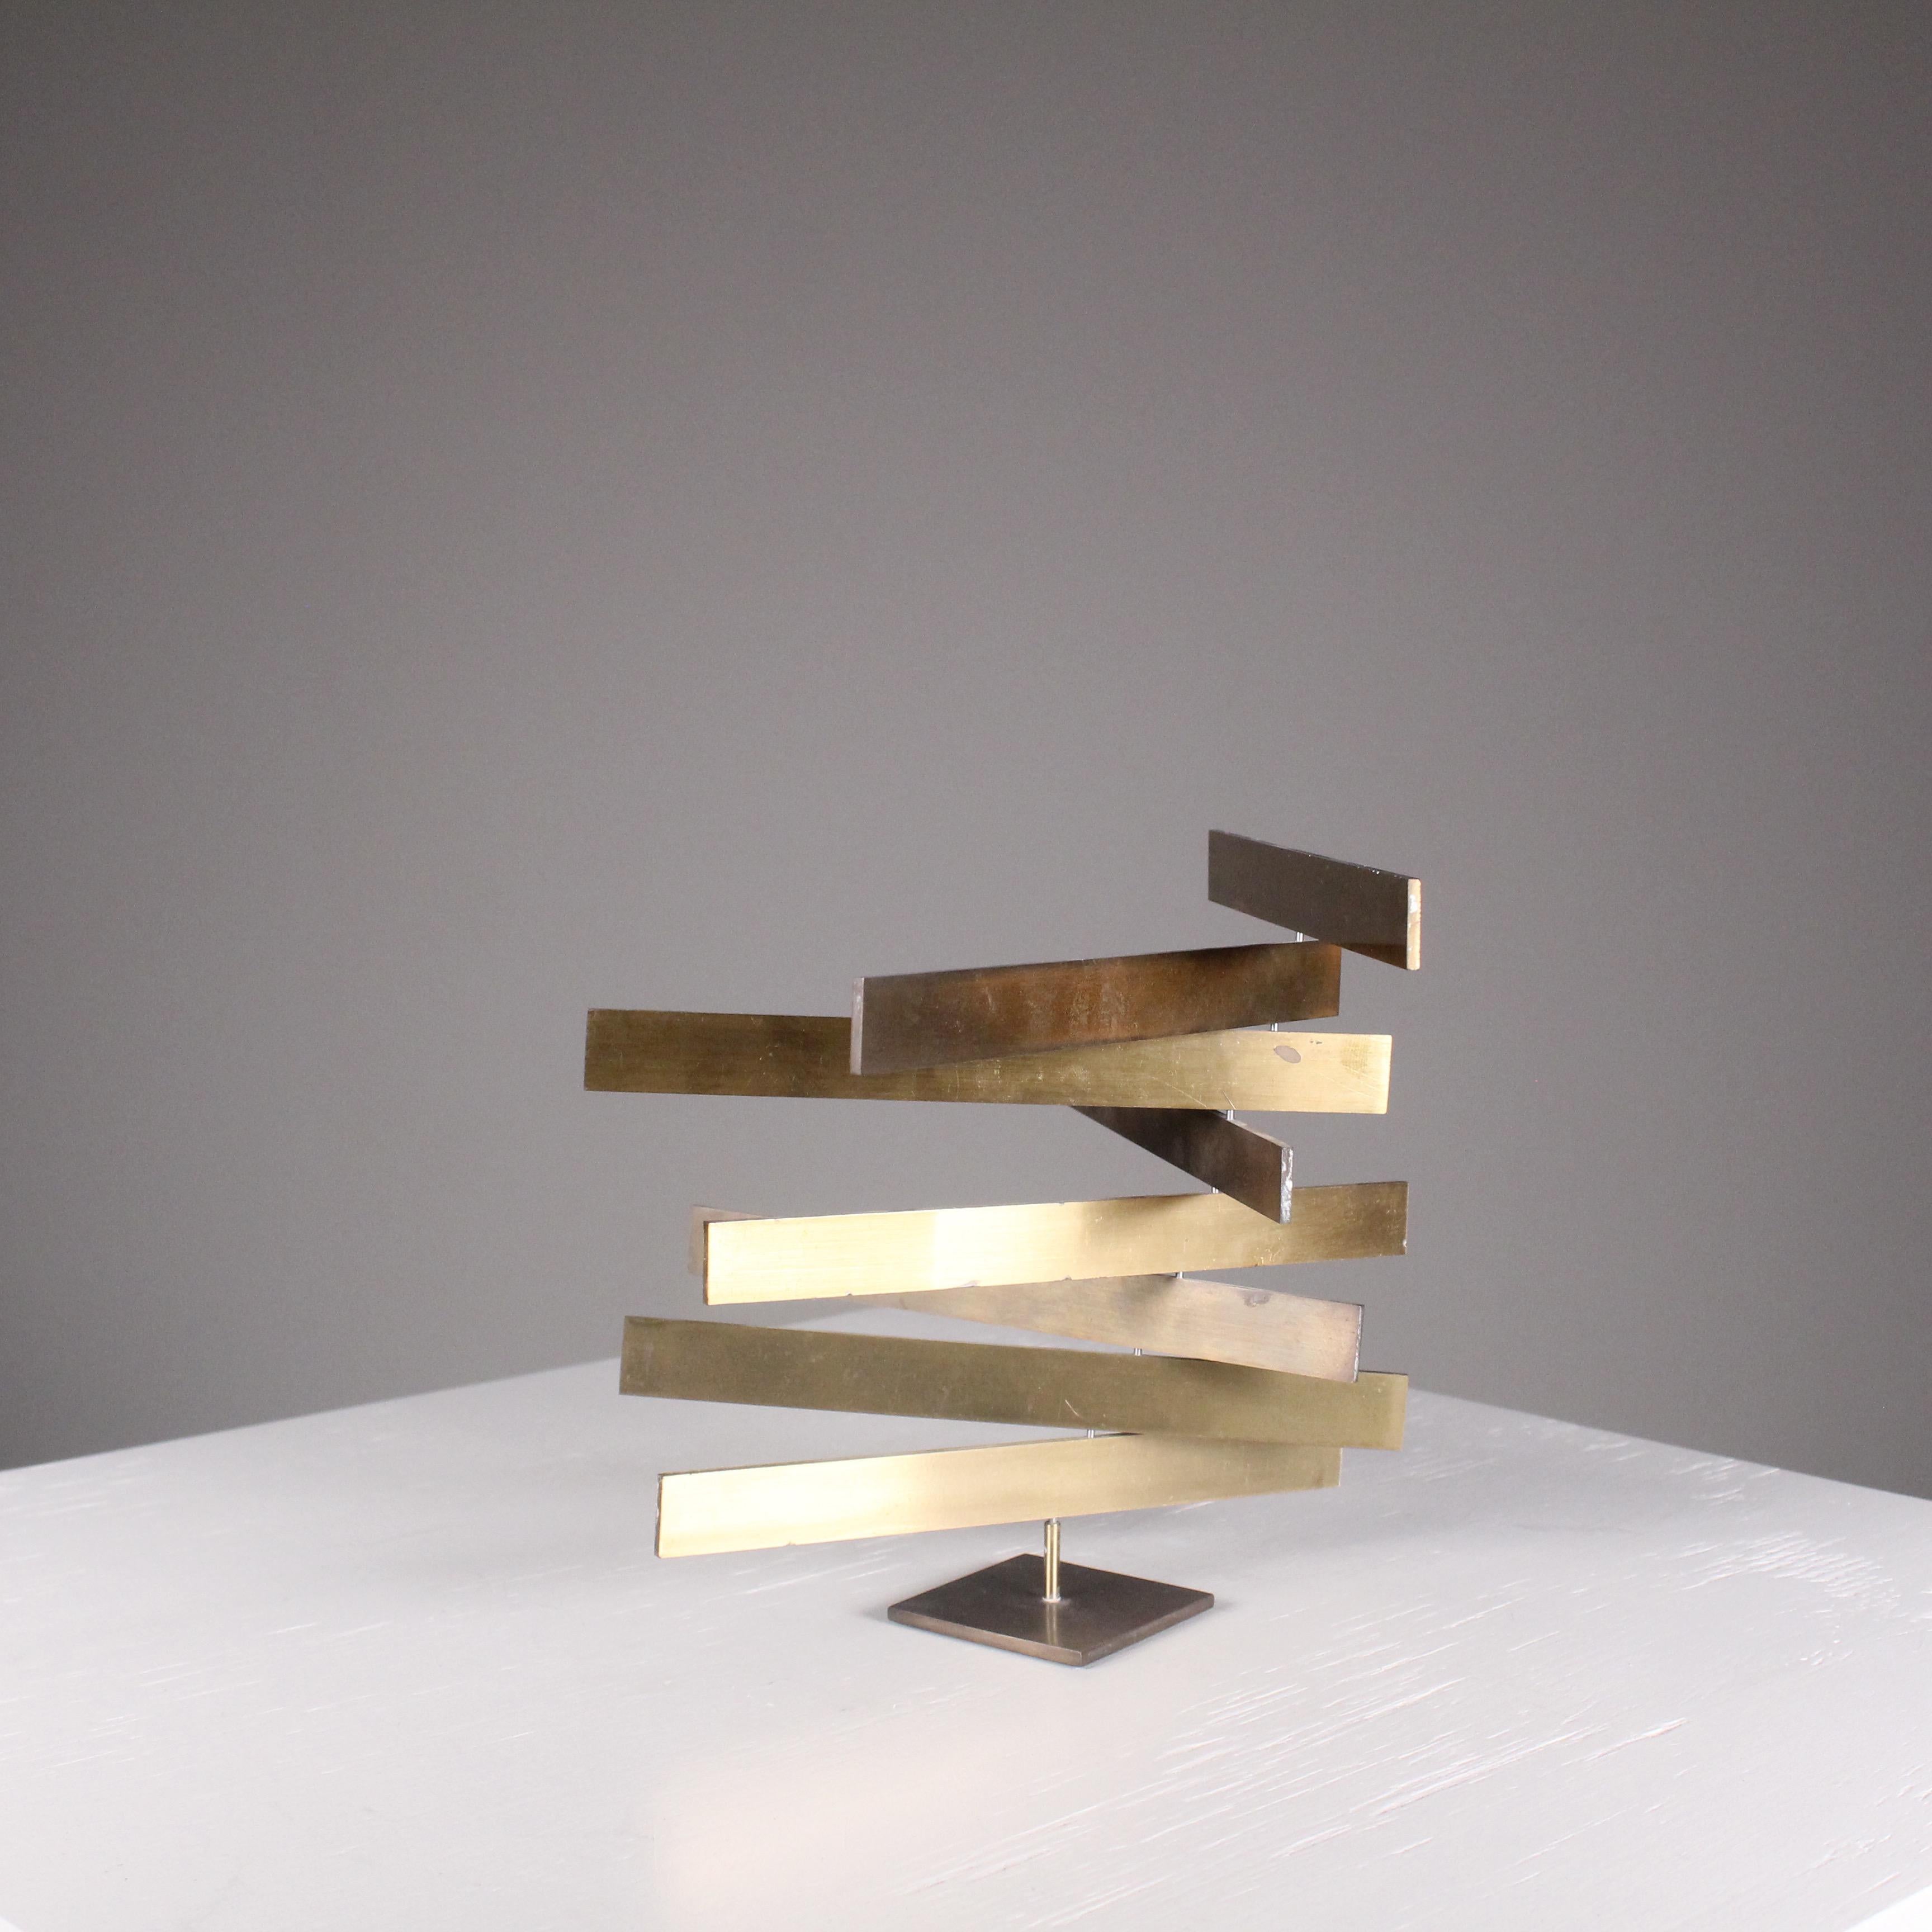 Brass Sculpture, Bilico, Victor Simonetti, Simon Gavina, 1969. A kinetic brass sculpture, Victor Simonetti's Bilico is a masterpiece of artistic elegance produced by Simon Gavina in 1969. The object can present a bit problem with stability if the